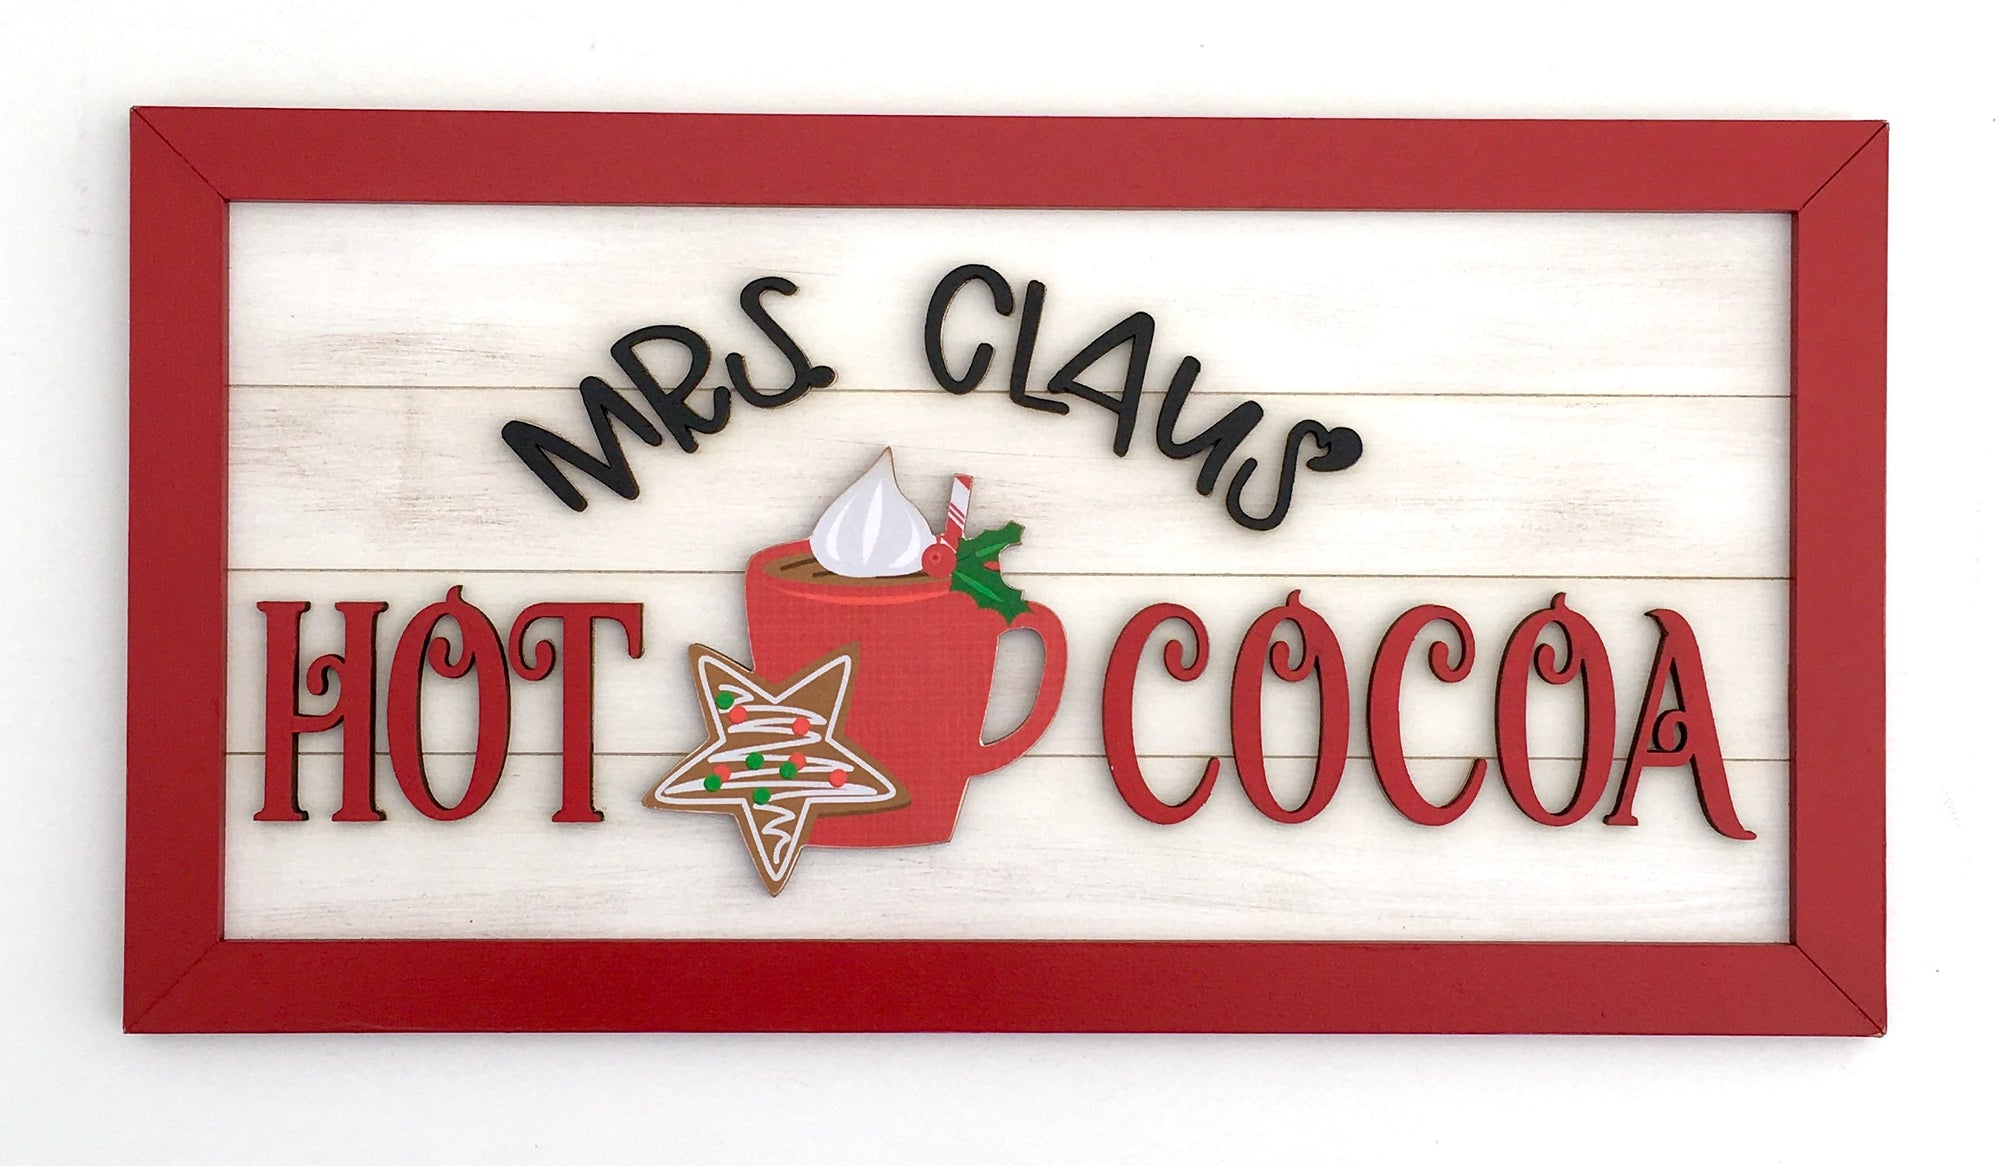 Mrs. Claus' Hot Cocoa shiplap sign, hot cocoa sign, wood decor sign, Christmas signs for tiered trays, Hot cocoa tiered tray ideas, Rae Dunn Hot Cocoa, handmade wood christmas decorations